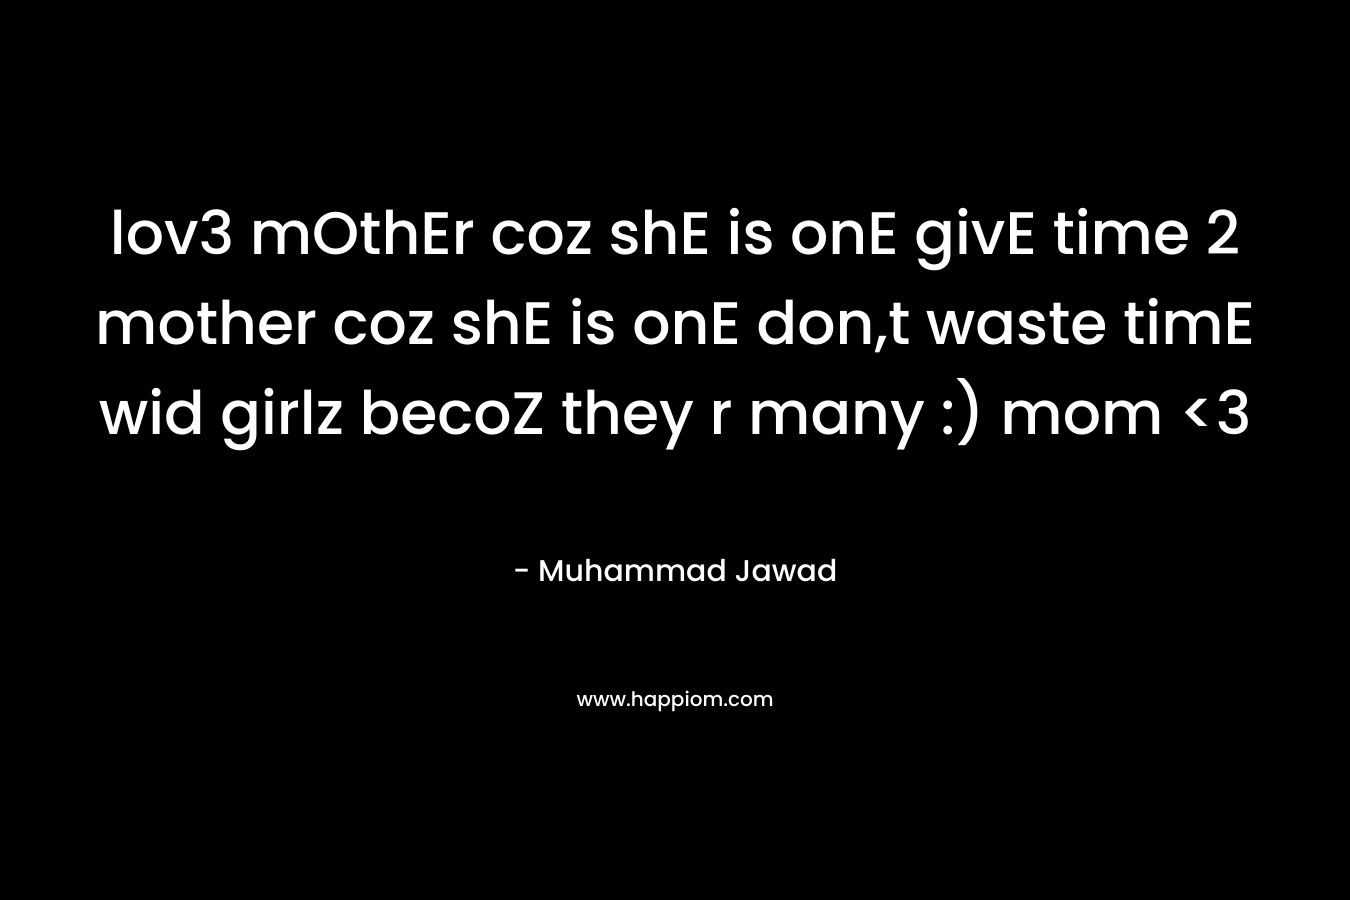 lov3 mOthEr coz shE is onE givE time 2 mother coz shE is onE don,t waste timE wid girlz becoZ they r many :) mom